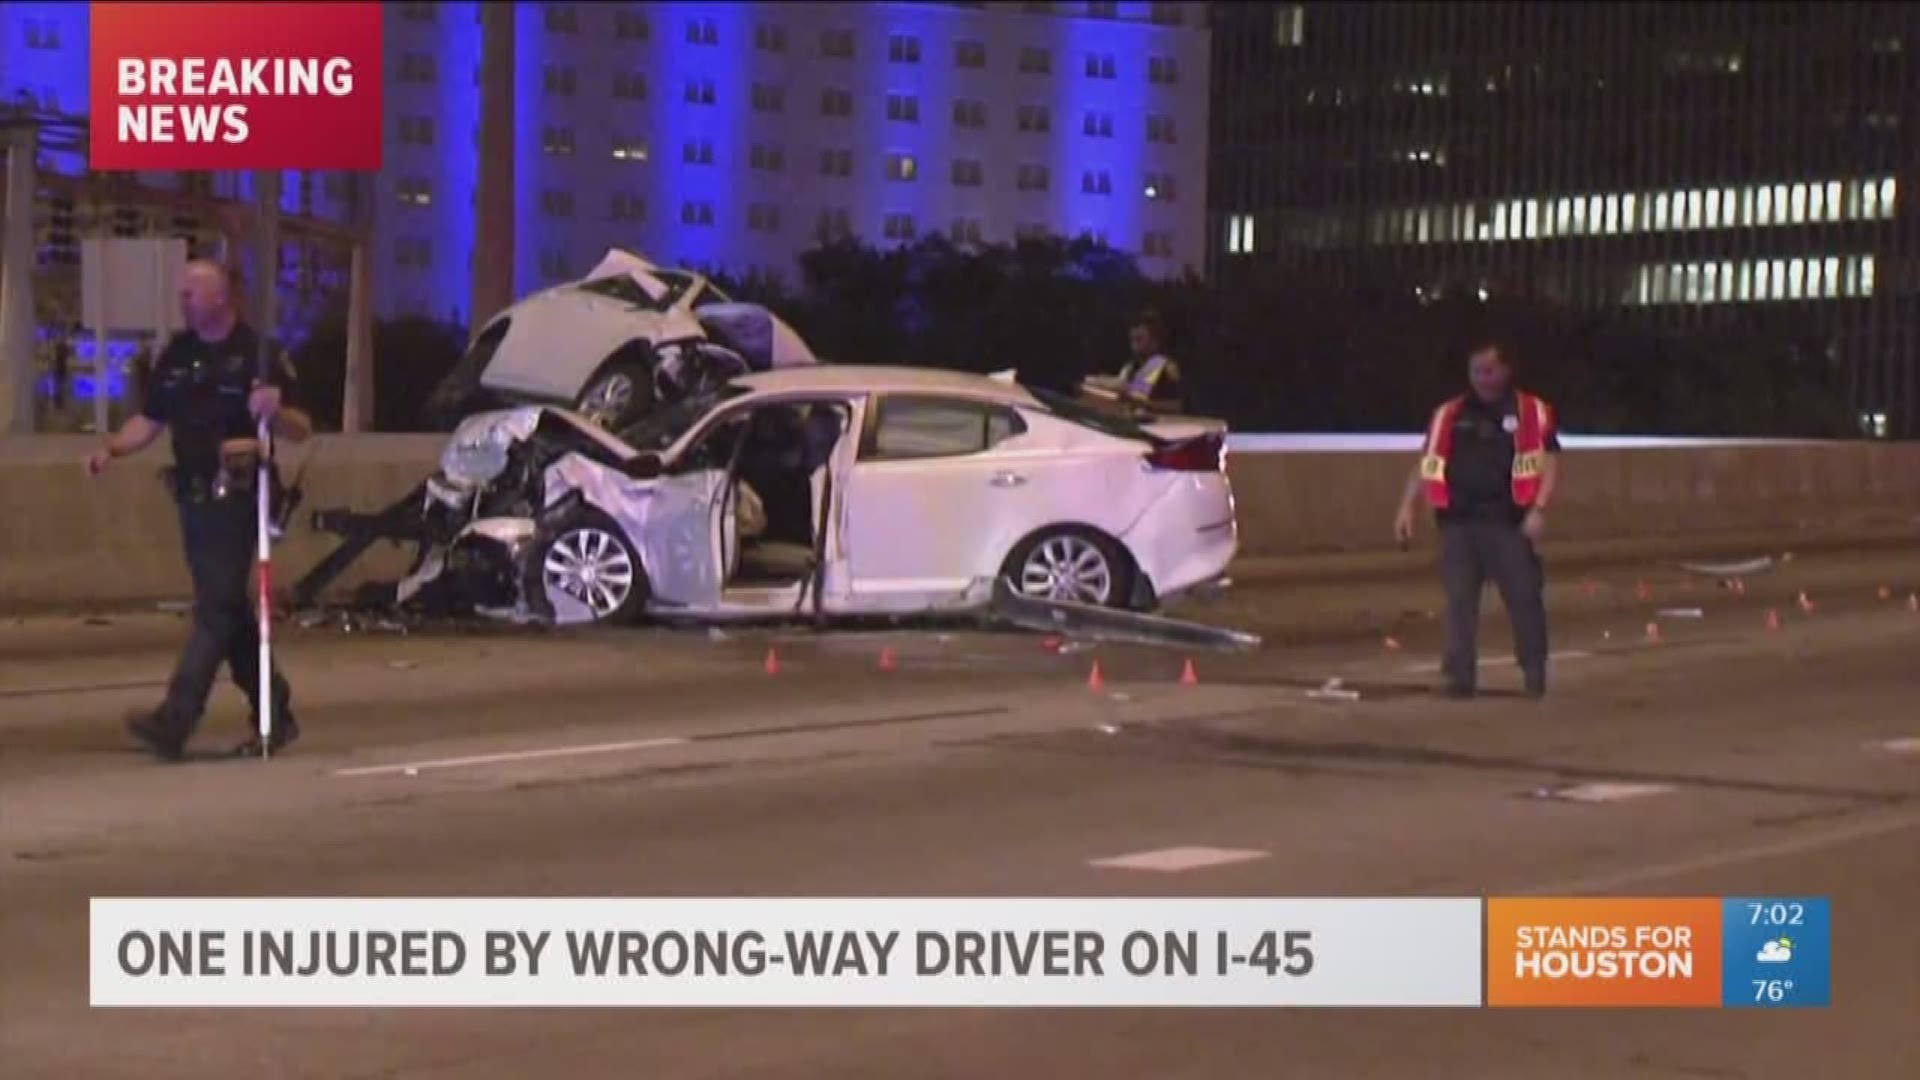 Police say a man is in critical condition after an intoxicated wrong way driver crashed into his vehicle on the Gulf Freeway early Saturday morning.